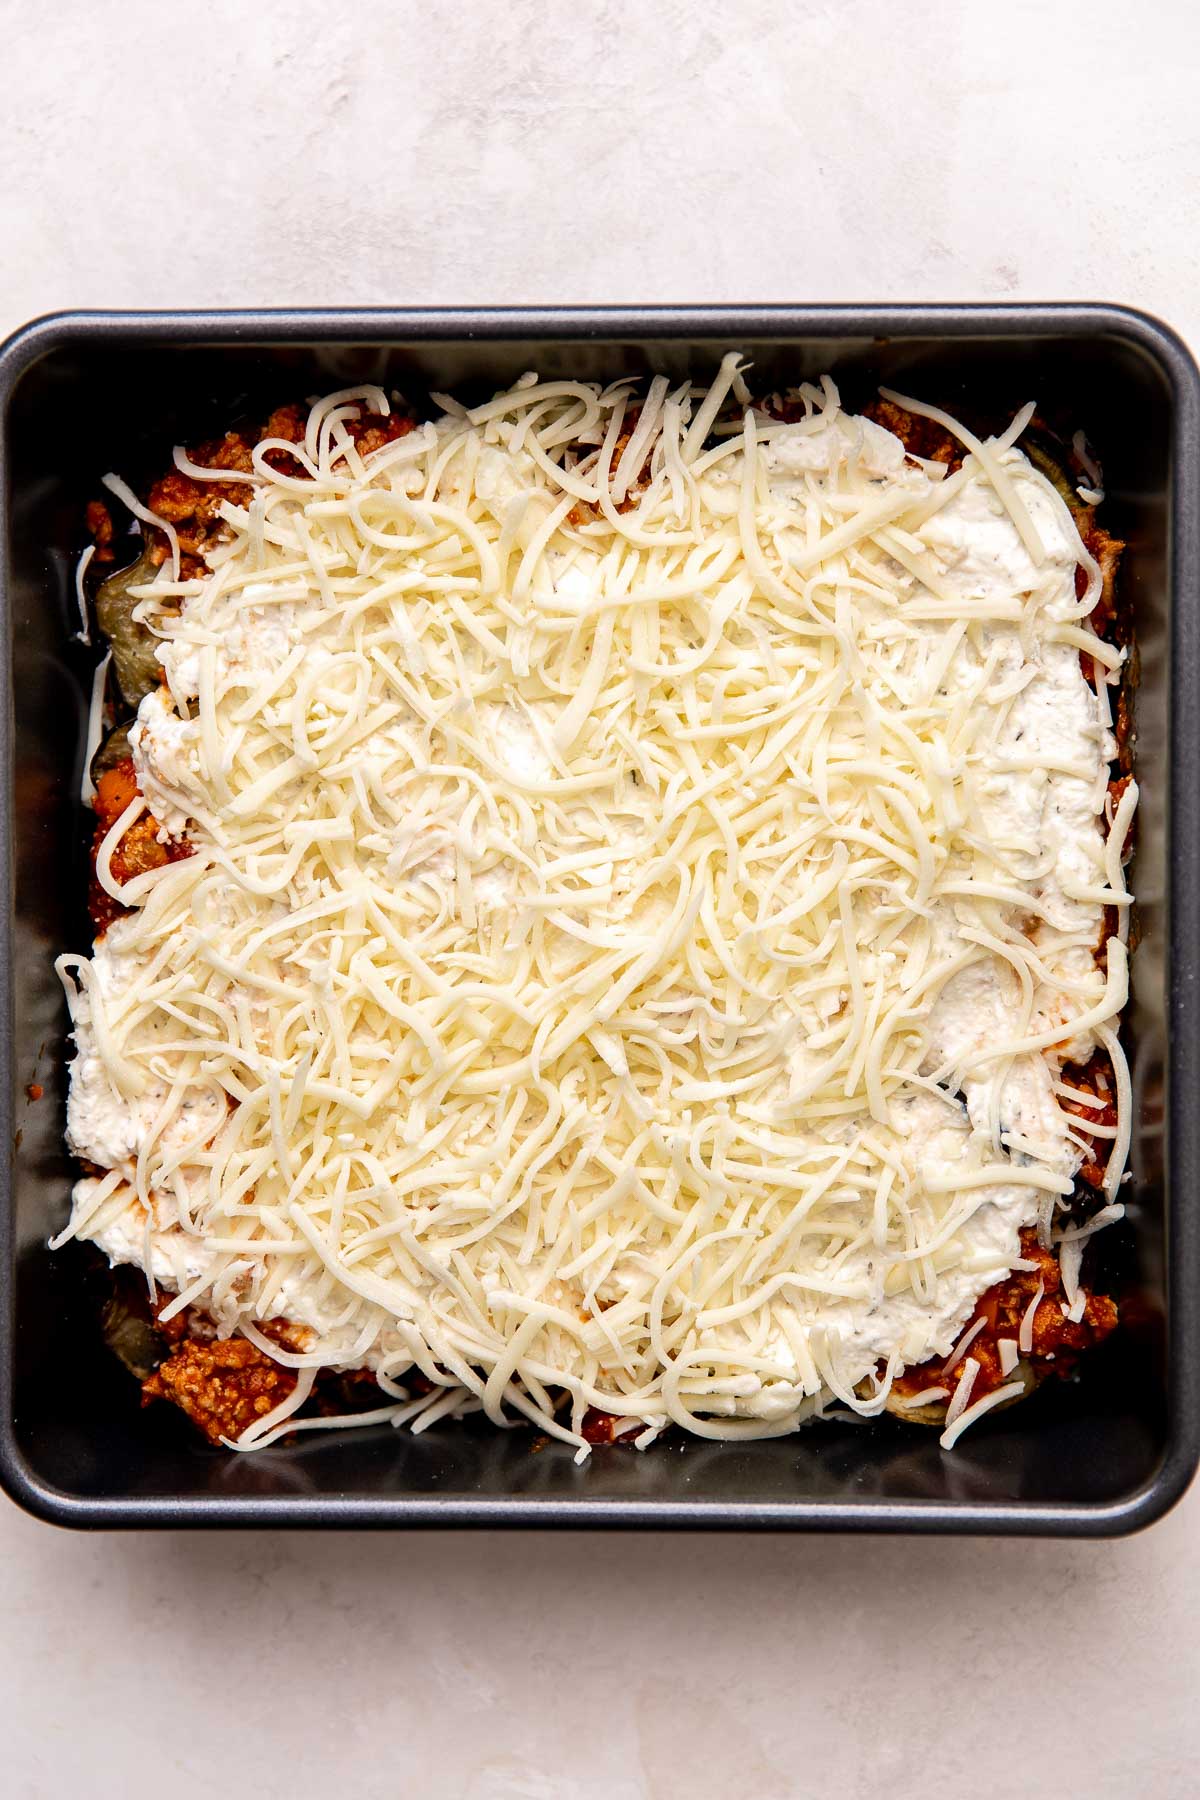 Another layer in the eggplant lasagna show the layer with roasted eggplant rounds topped with another layer of turkey bolognese, ricotta cheese mixture, and shredded mozzarella inside of a metal 9x9 baking dish. The baking dish sits atop a creamy white textured surface.